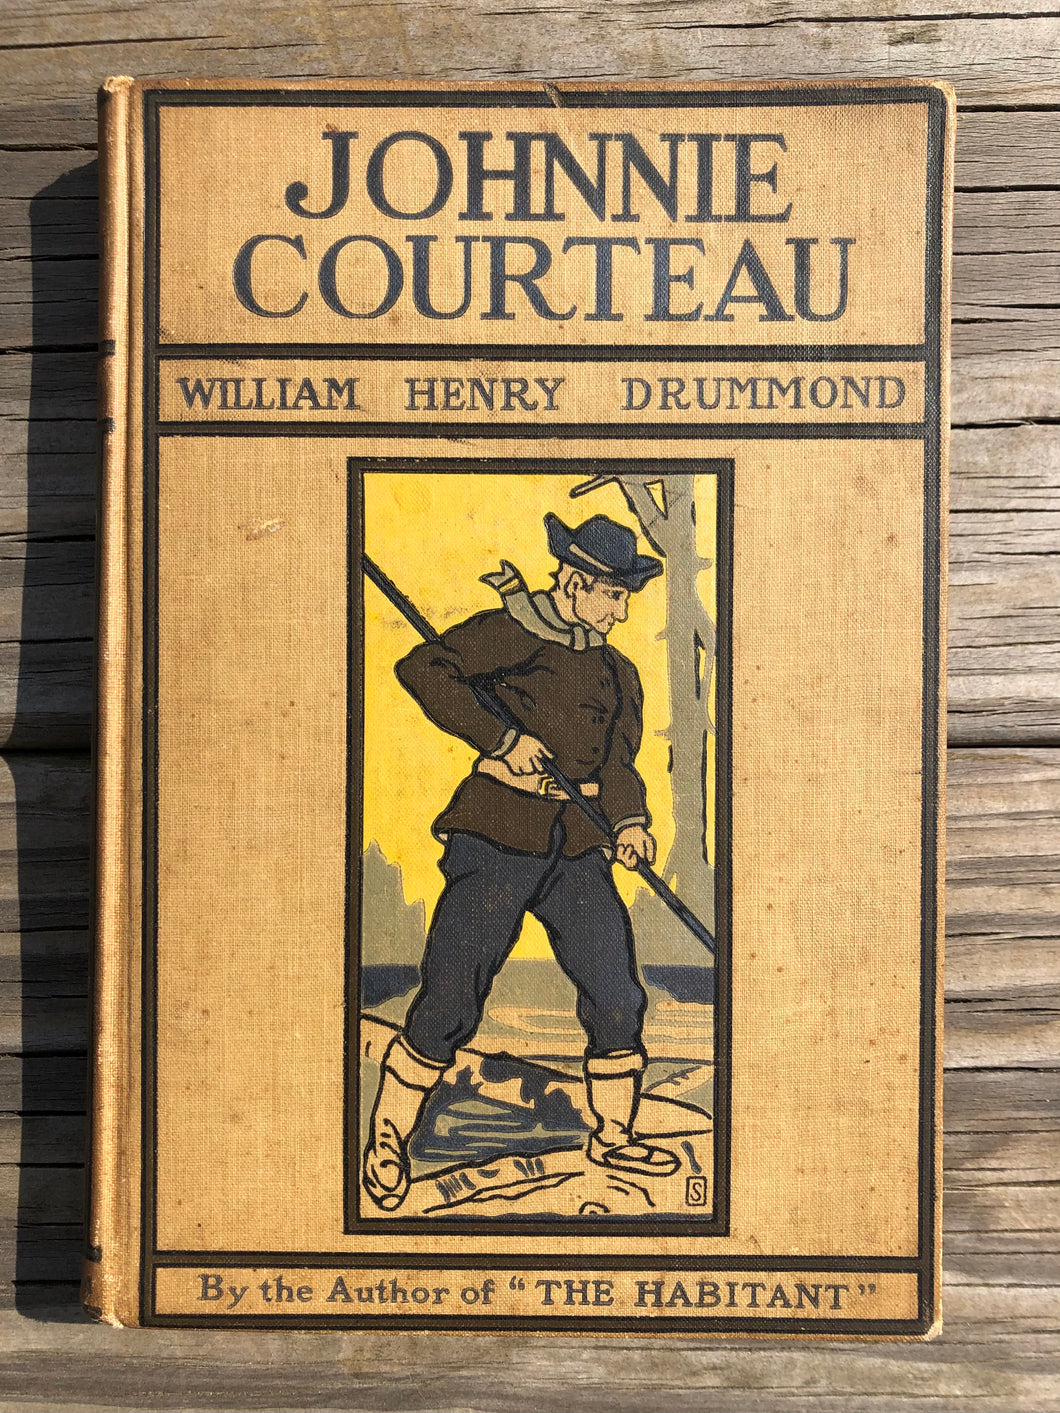 “Johnnie Courteau and Other Poems” by William Henry Drummond